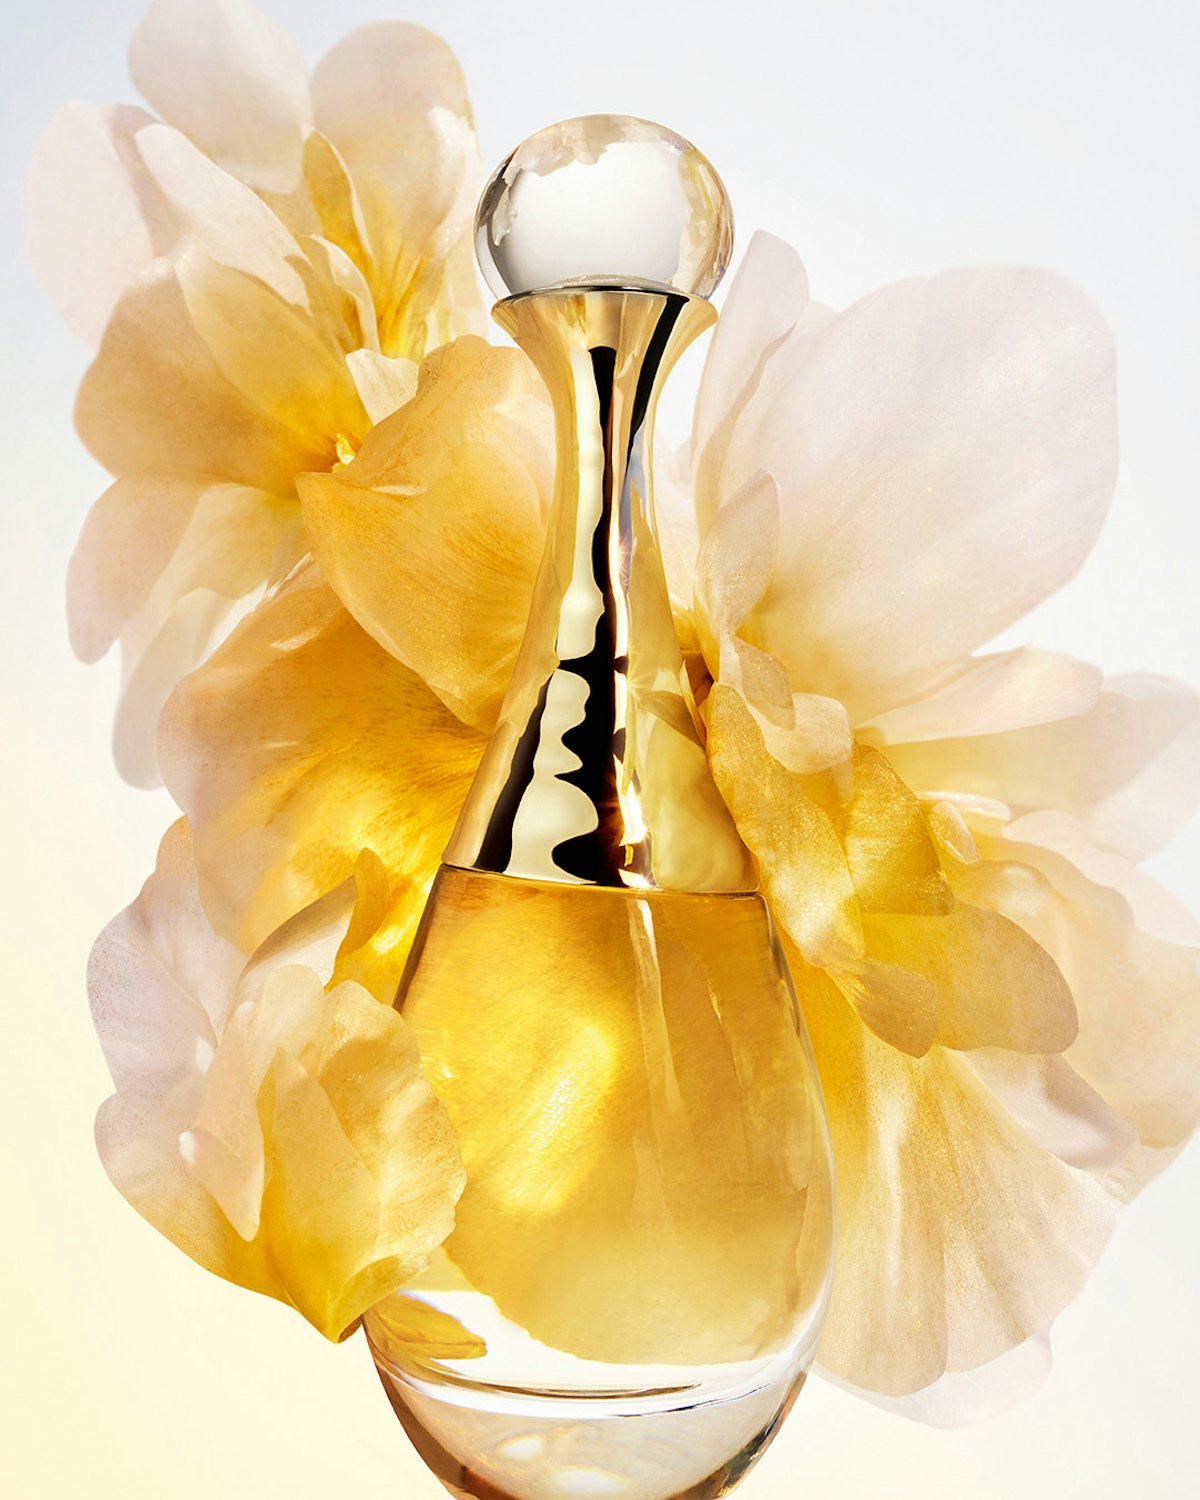 Fragrance and skincare boost LVMH beauty sales 